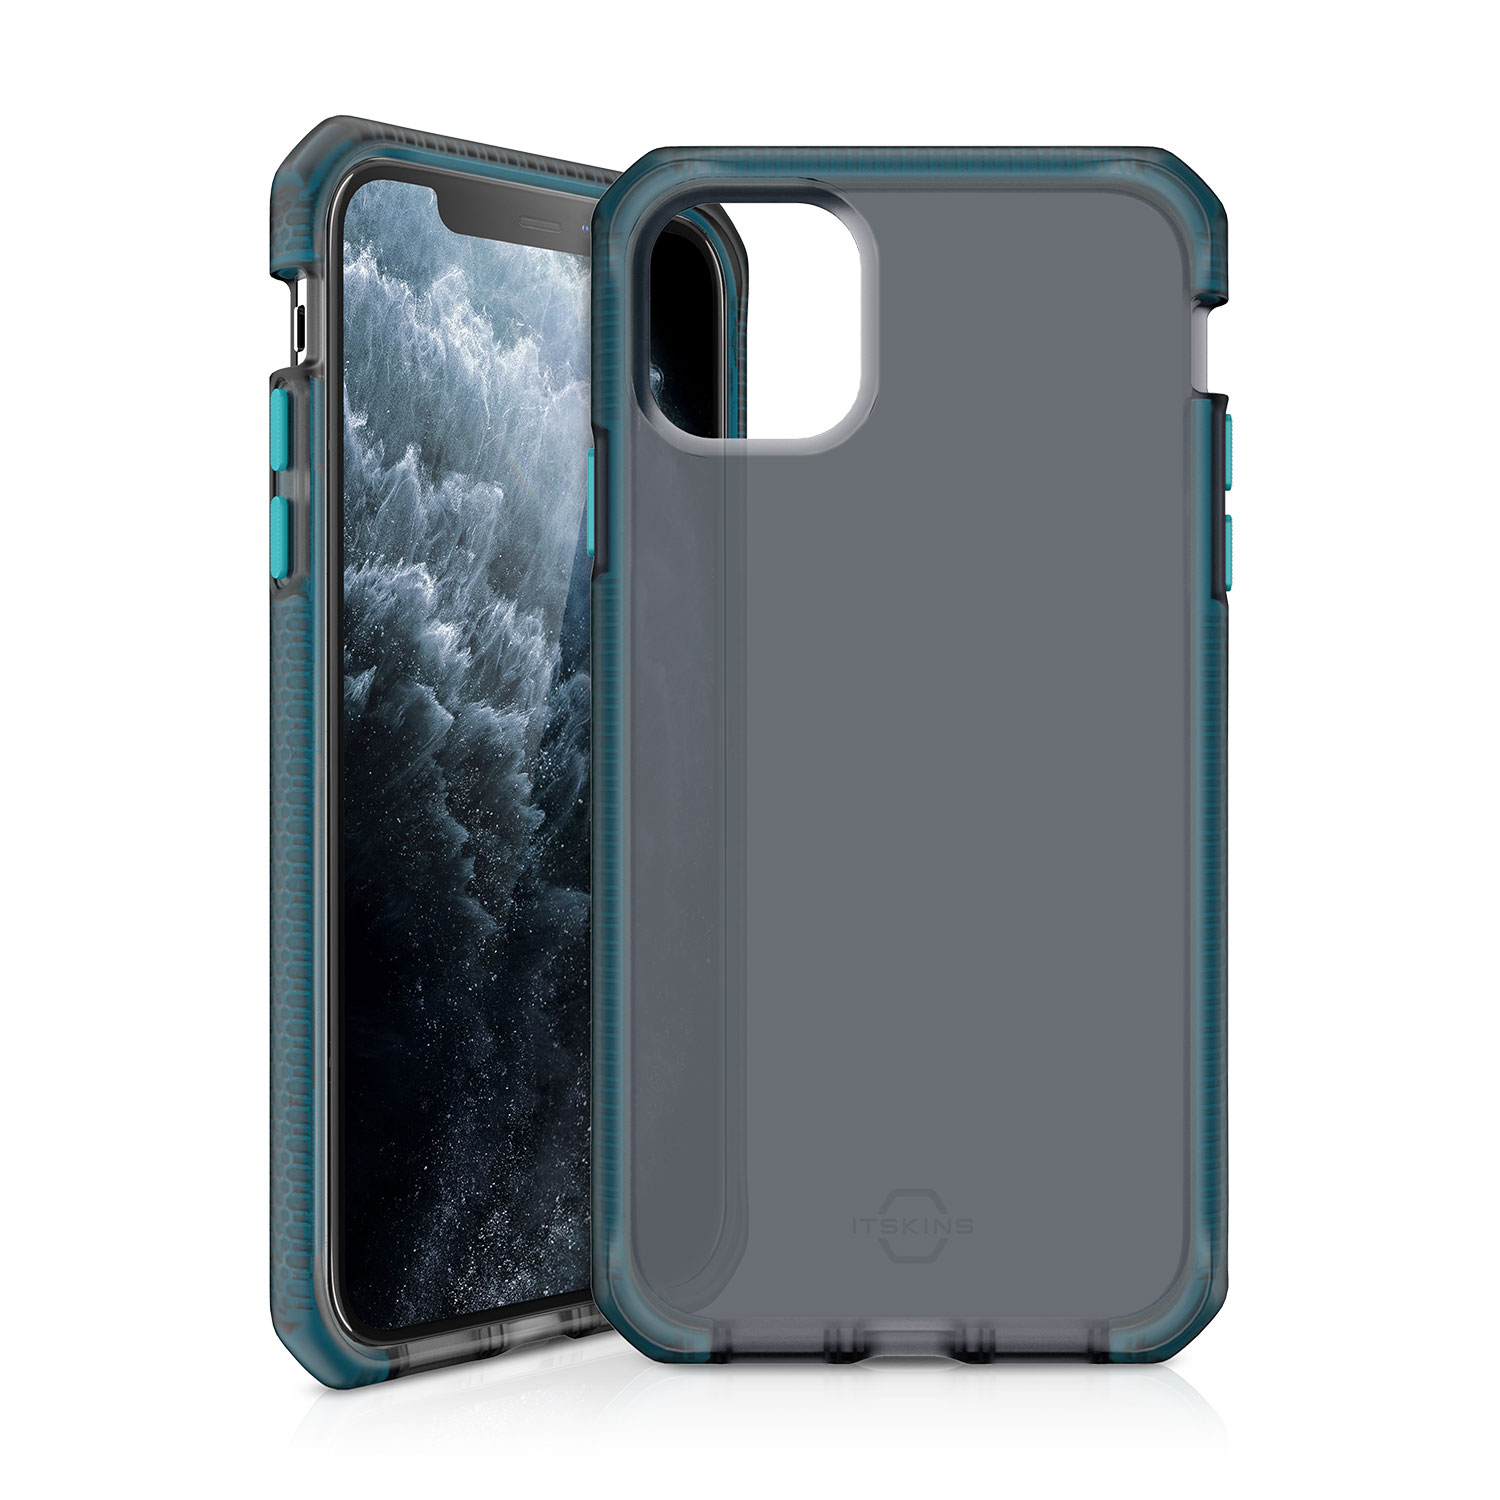 ITSKINS Supreme Frost Case for Apple iPhone Xs Max - Centurion Blue and  Black 